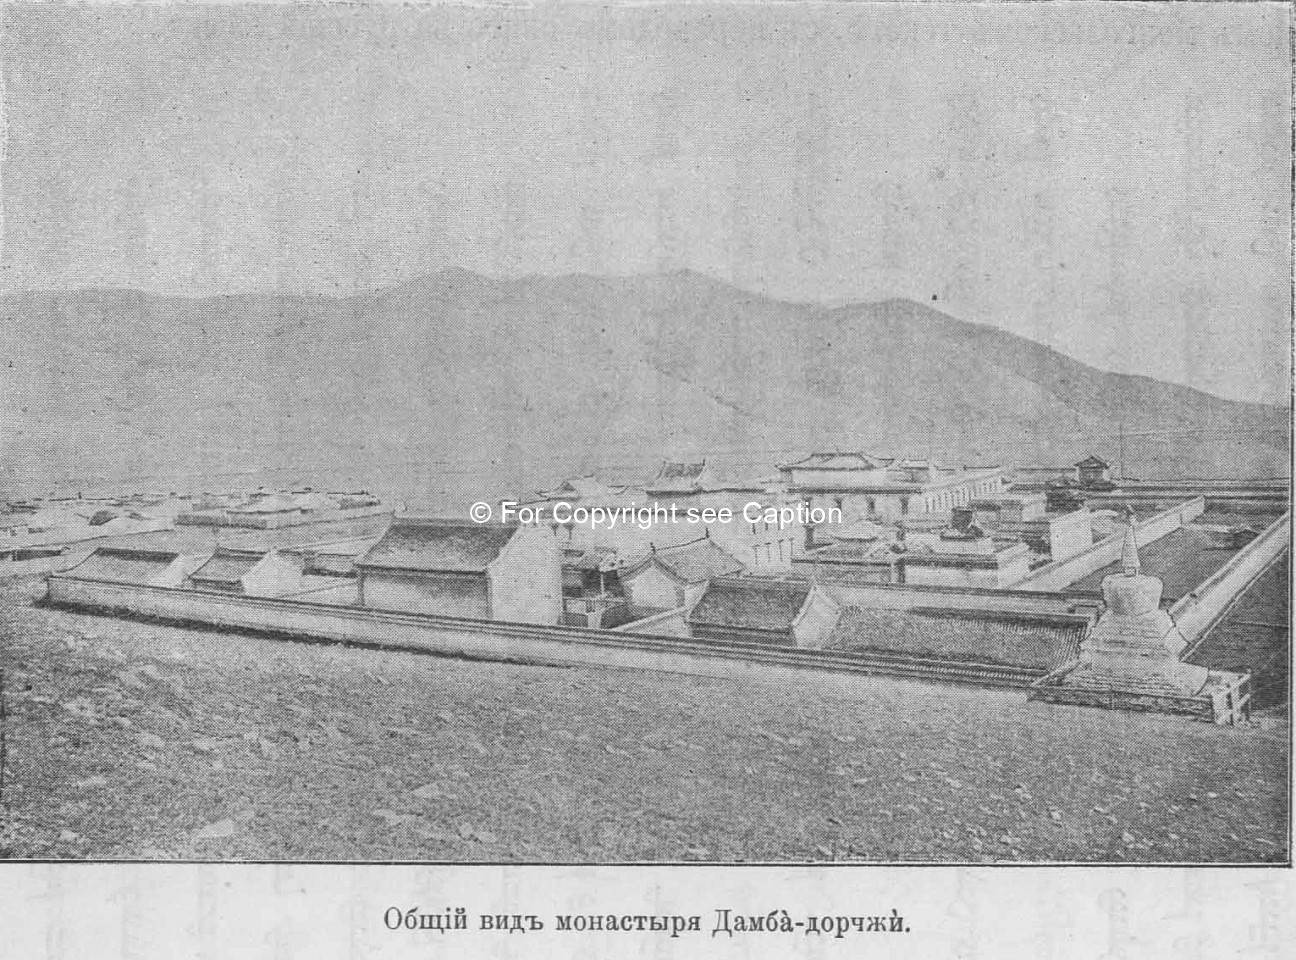 General view from the North. Pozdneev, A. M., Mongolija i Mongoly. T. 1. Sankt-Peterburg 1896 (photo